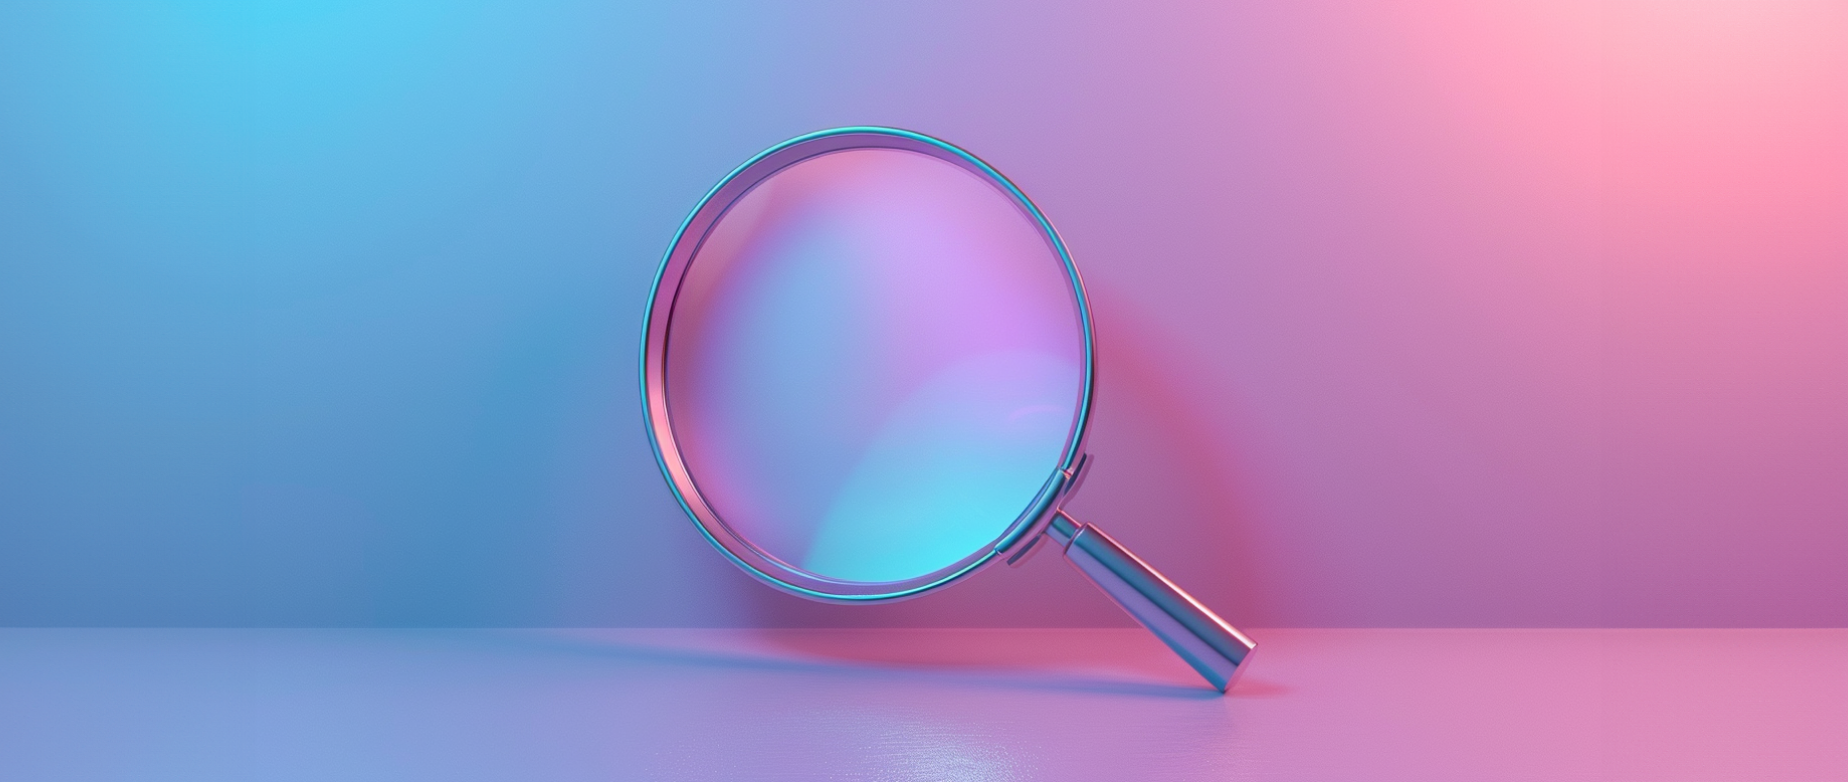 a magnifying glass on blue and pink background representing market research